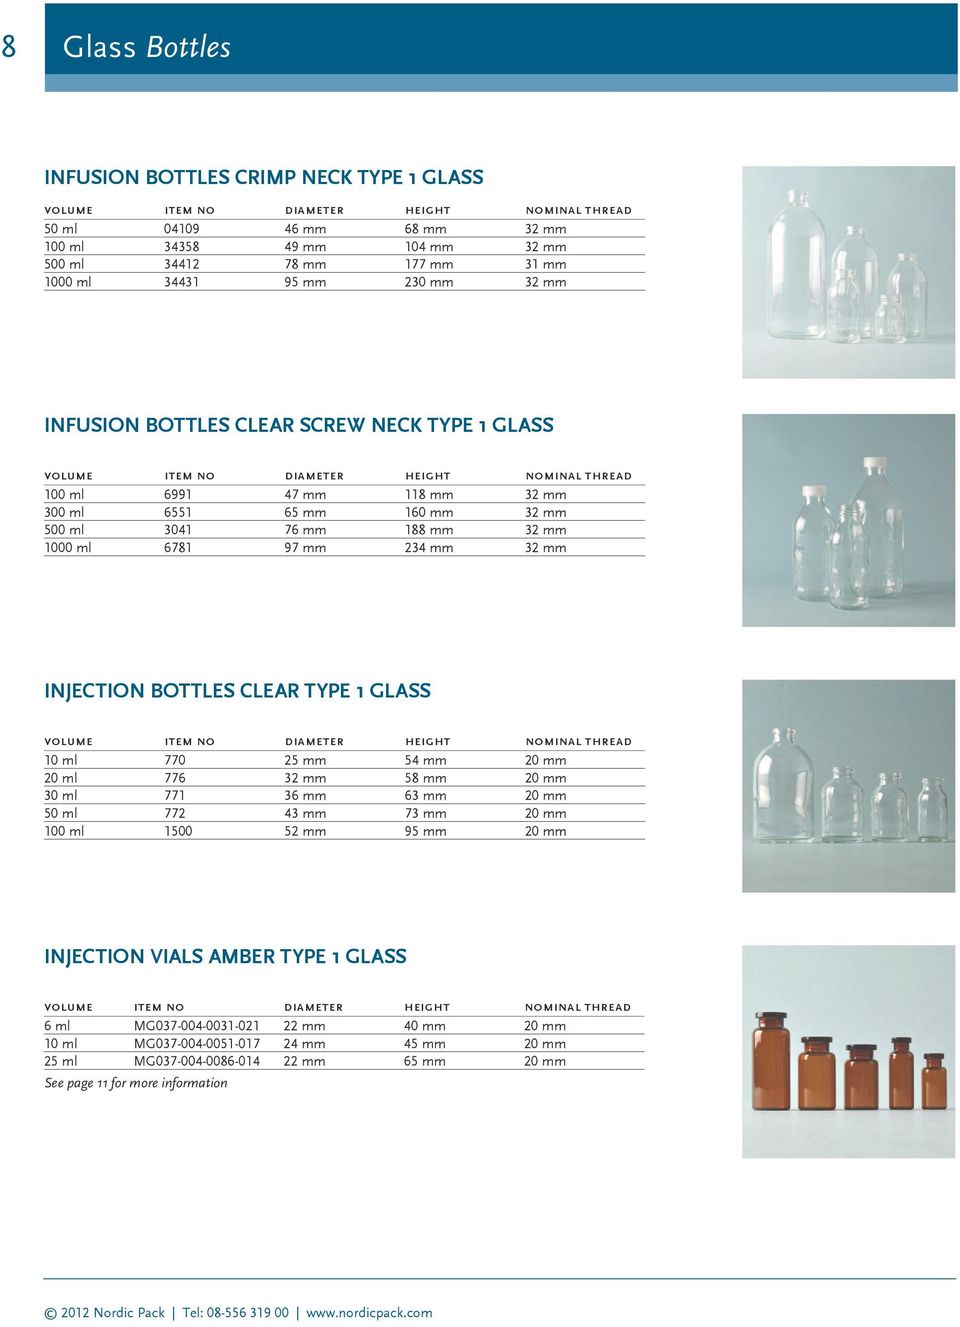 GLASS 10 ml 770 25 mm 54 mm 20 mm 20 ml 776 32 mm 58 mm 20 mm 30 ml 771 36 mm 63 mm 20 mm 50 ml 772 43 mm 73 mm 20 mm 100 ml 1500 52 mm 95 mm 20 mm INJECTION VIALS AMBER TYPE 1 GLASS 6 ml